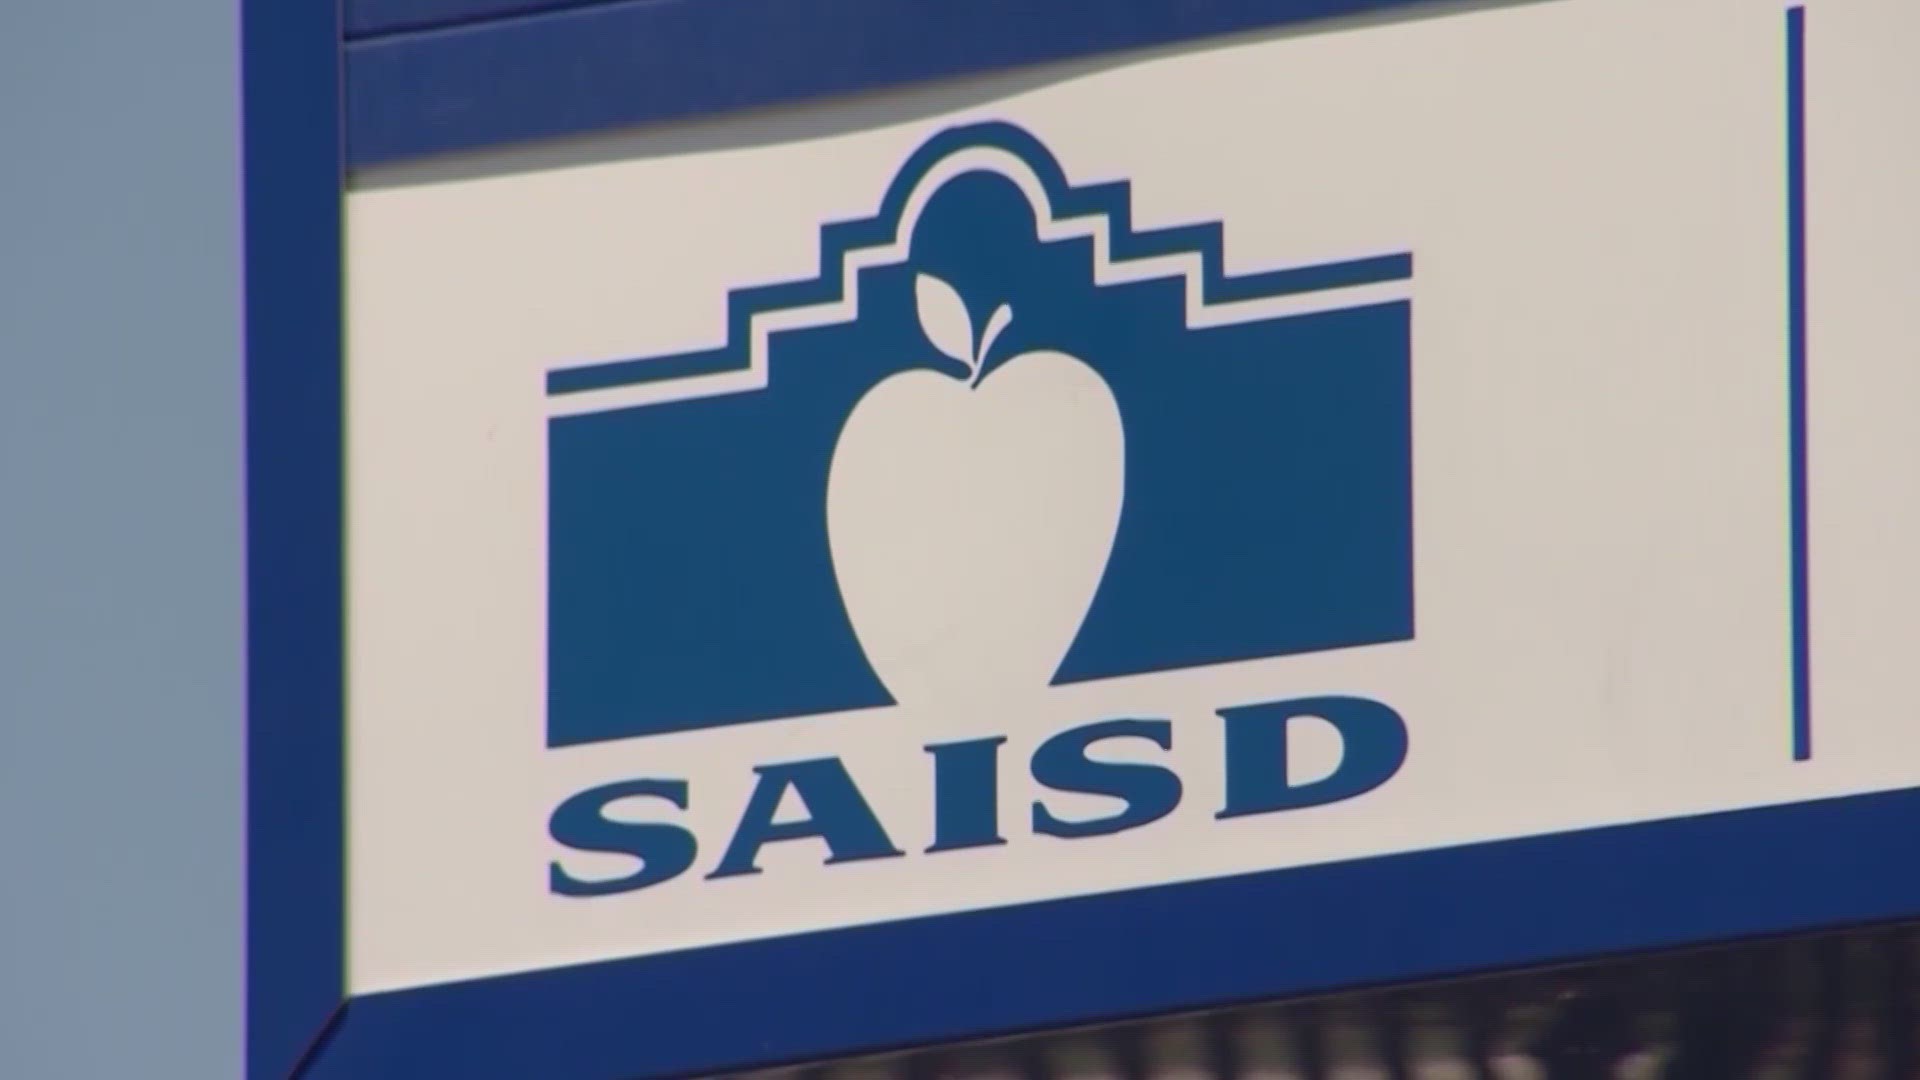 SAISD approves nearly 20 million in pay raises for all fulltime staff